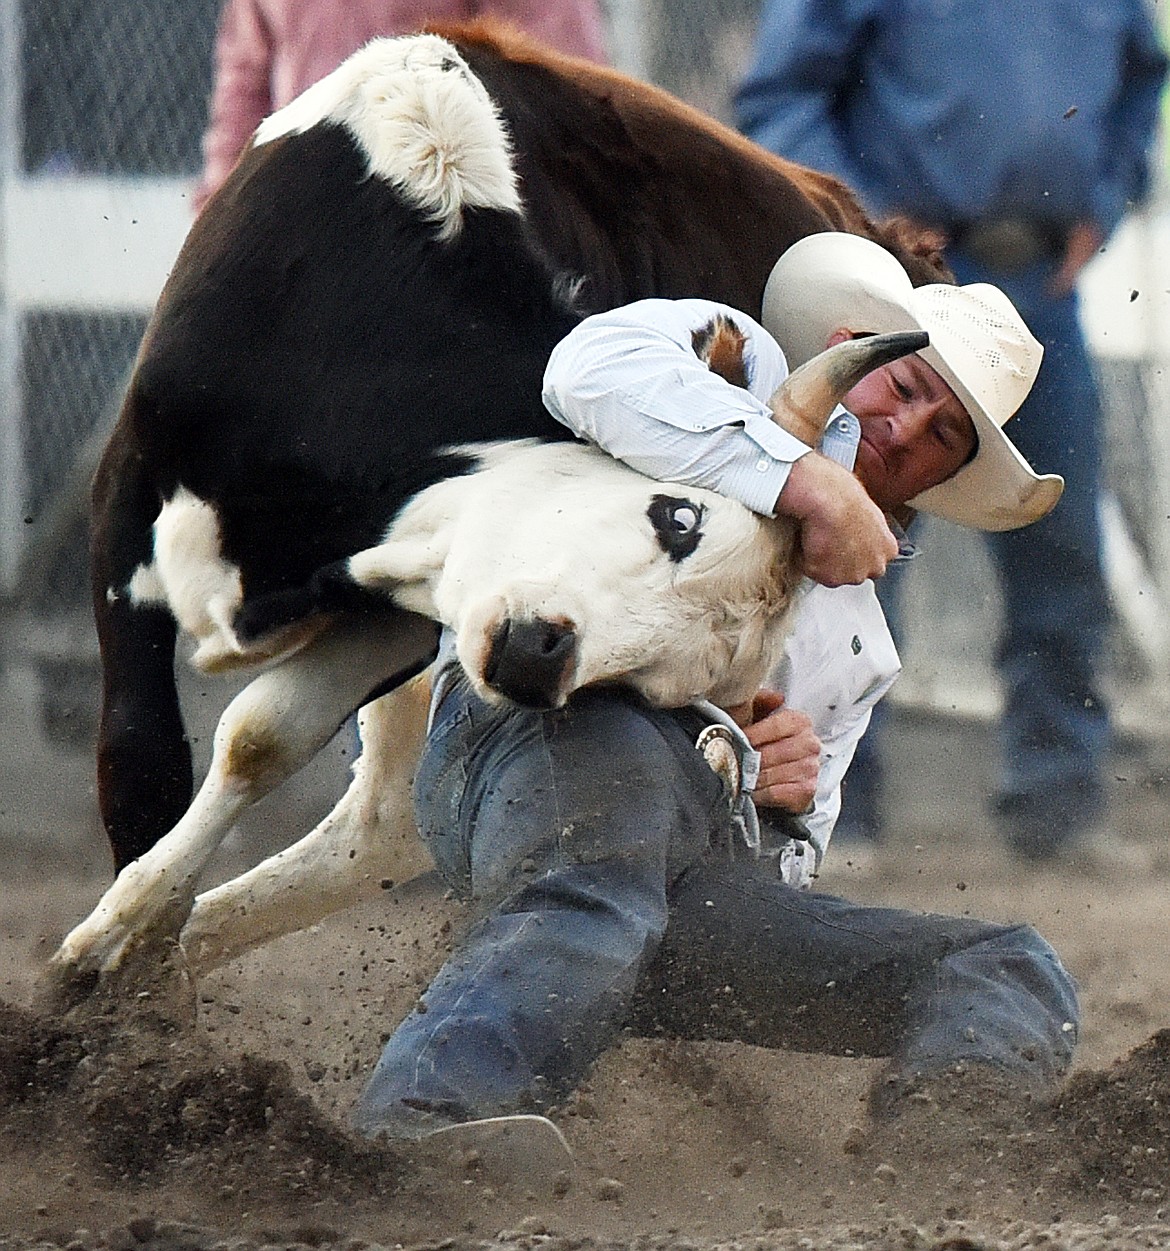 Ross Mosher, from Augusta, Montana, wrestles his steer to the ground during steer wrestling at the Northwest Montana Fair PRCA Rodeo at the Flathead County Fairgrounds on Saturday. (Casey Kreider/Daily Inter Lake)